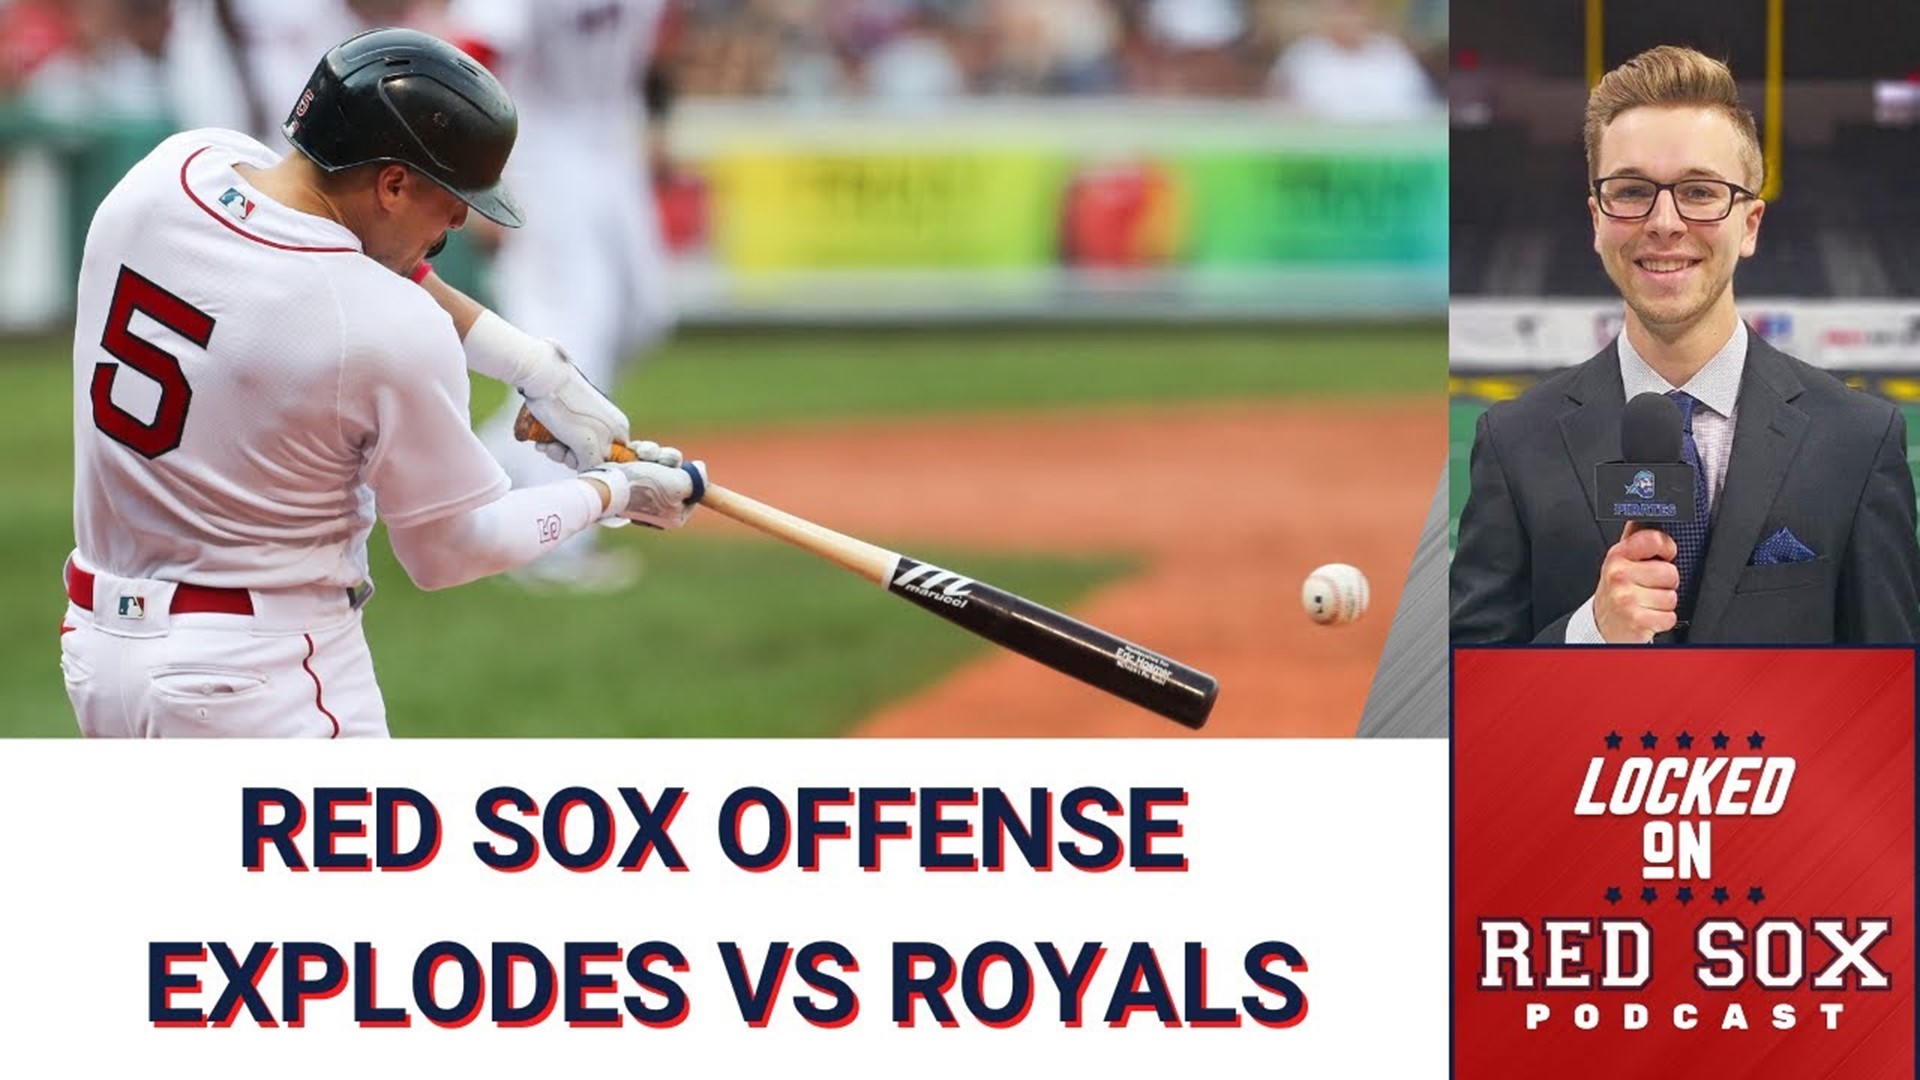 The Red Sox finish off the weekend series vs Kanas City Royals with a 13-run offensive explosion to help them win the series. This and more on Locked On Red Sox.